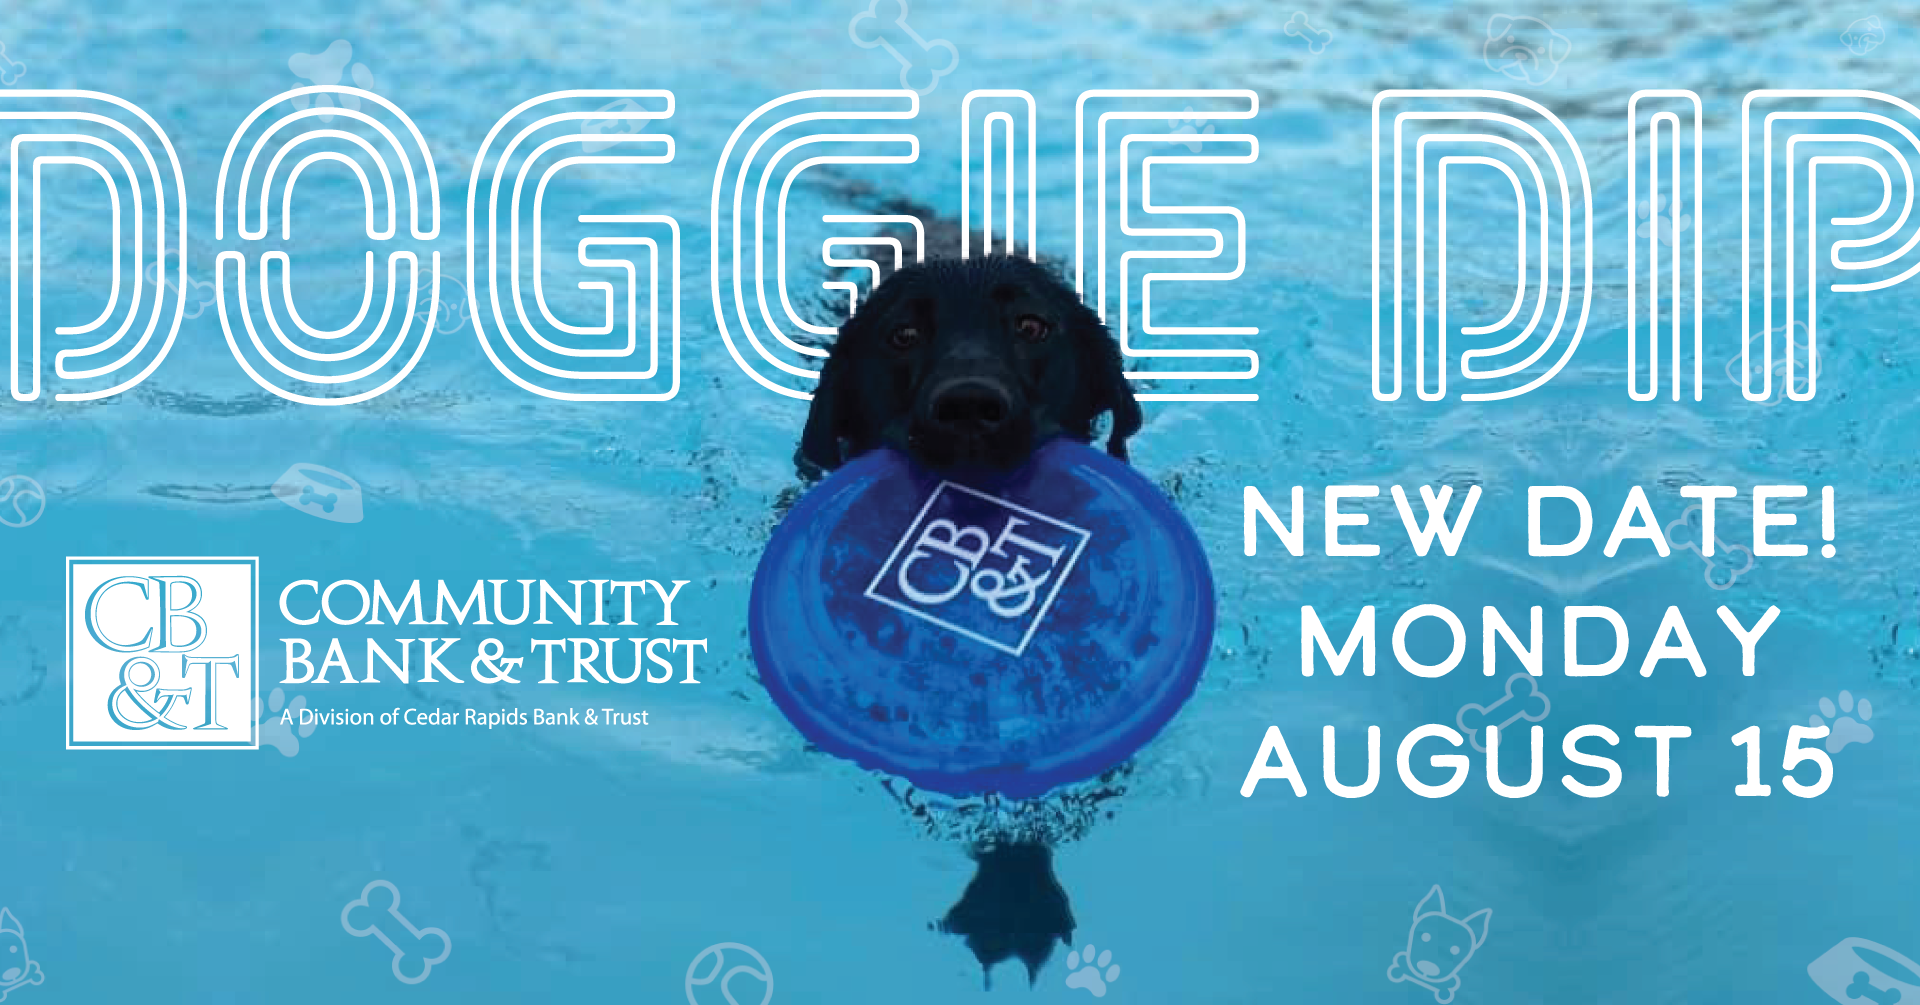 Doggie dip event cover 2022 aug 15